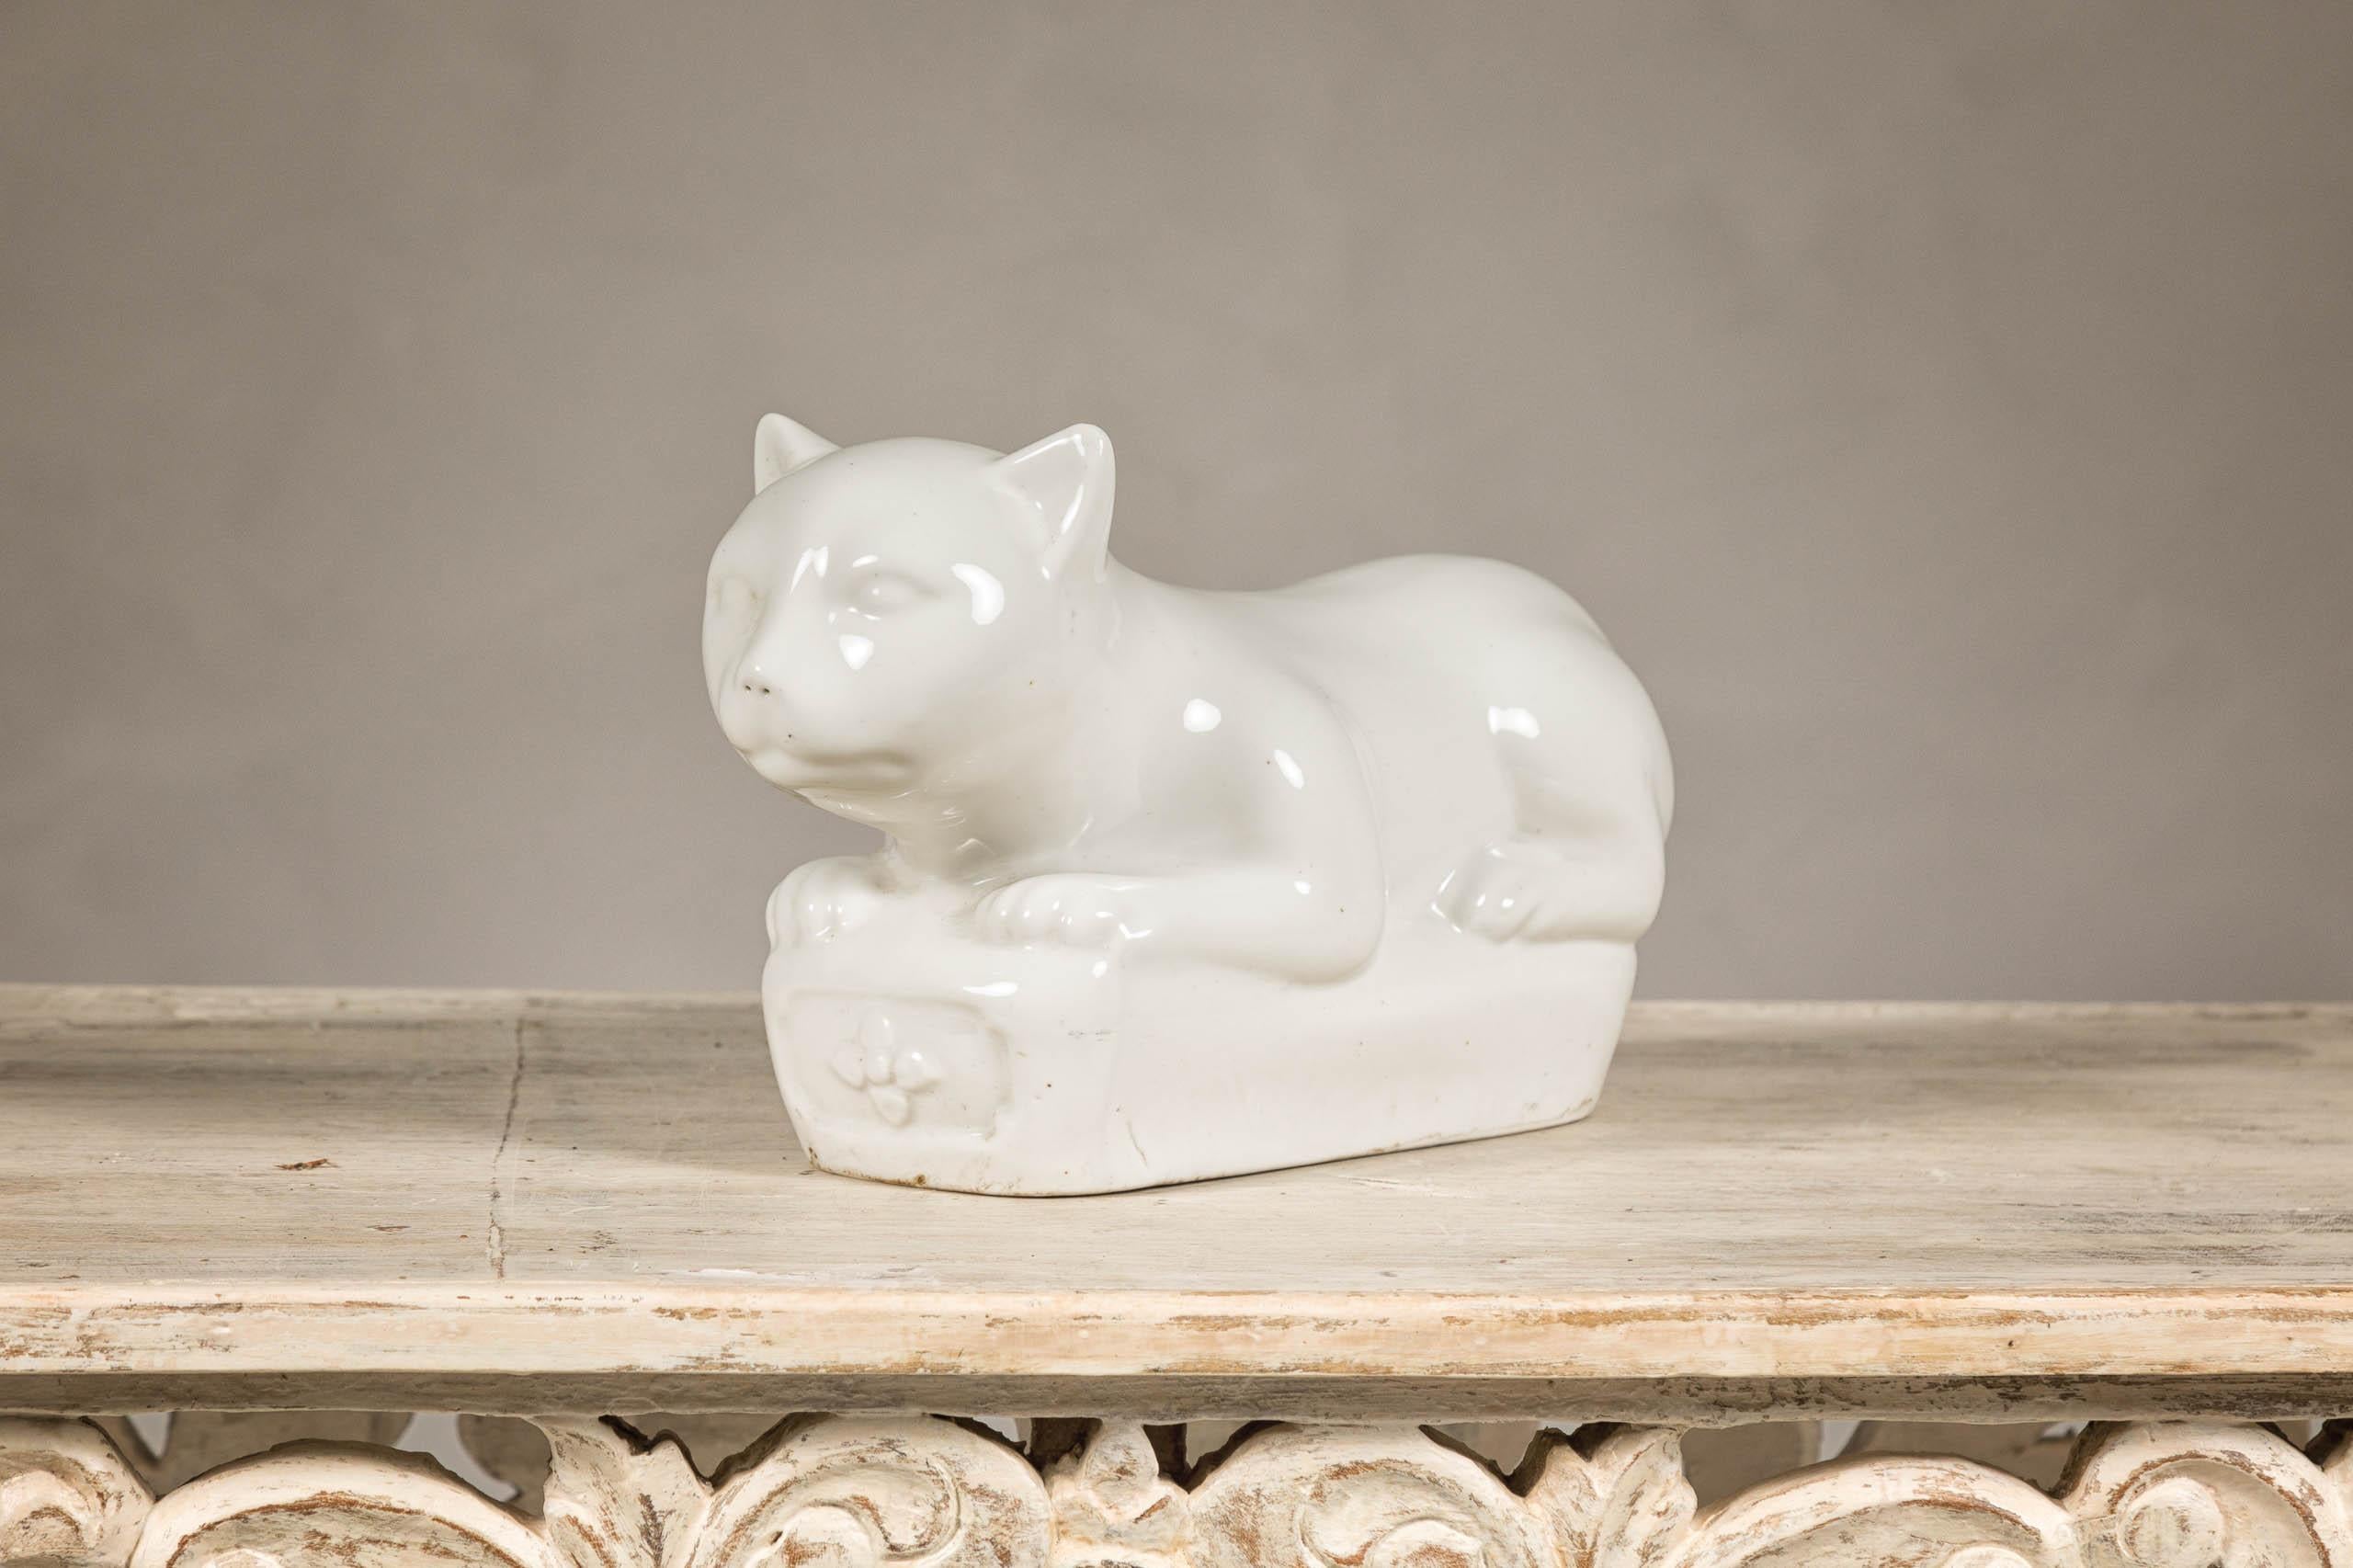 Petite Blanc de Chine Porcelain Cat Sculpture, Vintage In Good Condition For Sale In Yonkers, NY